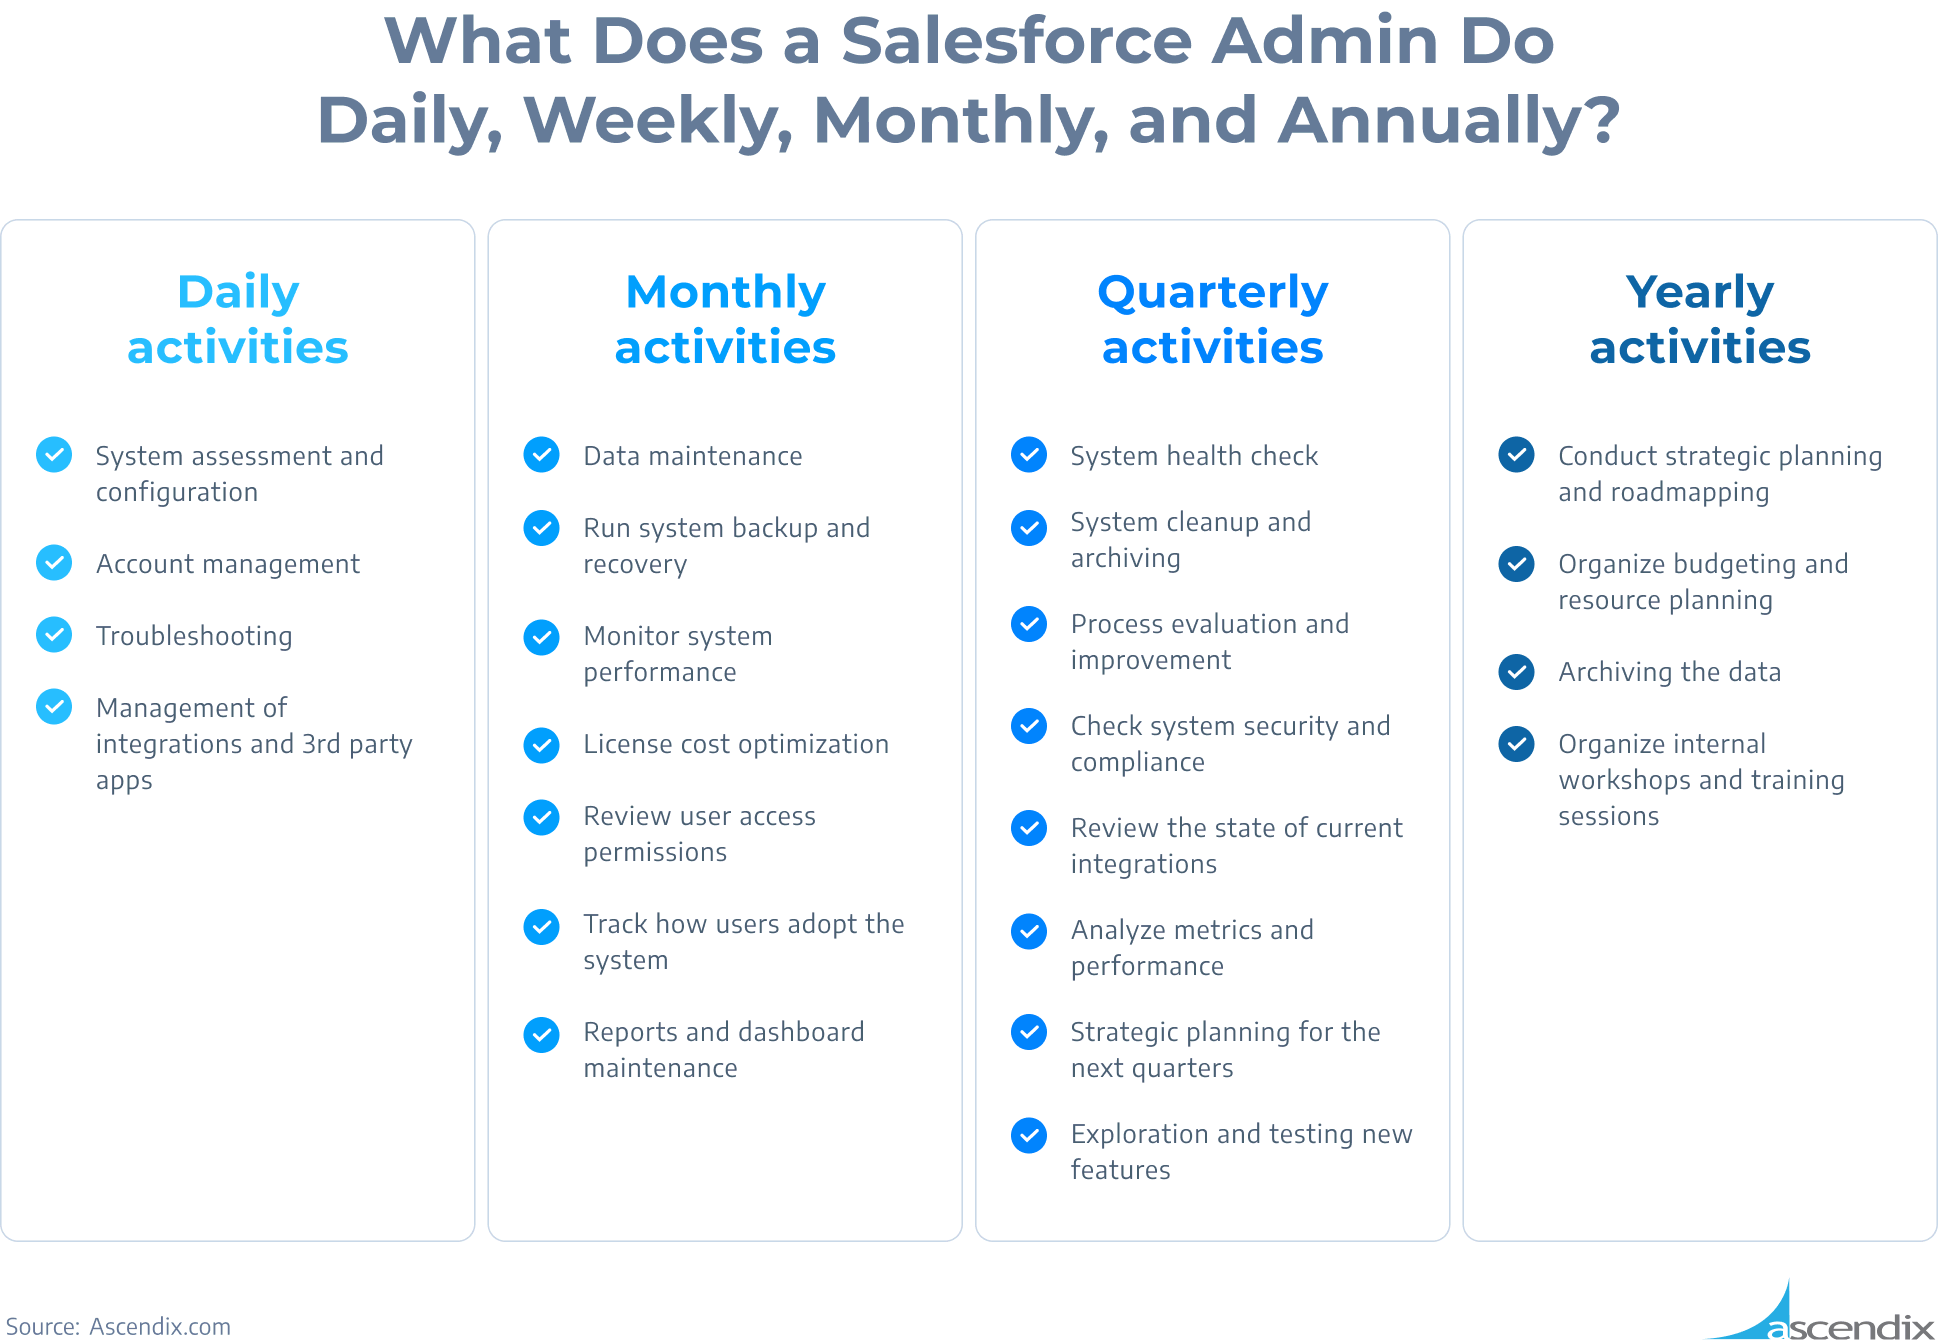 What Does a Salesforce Admin Do Daily Weekly Monthly and Annually